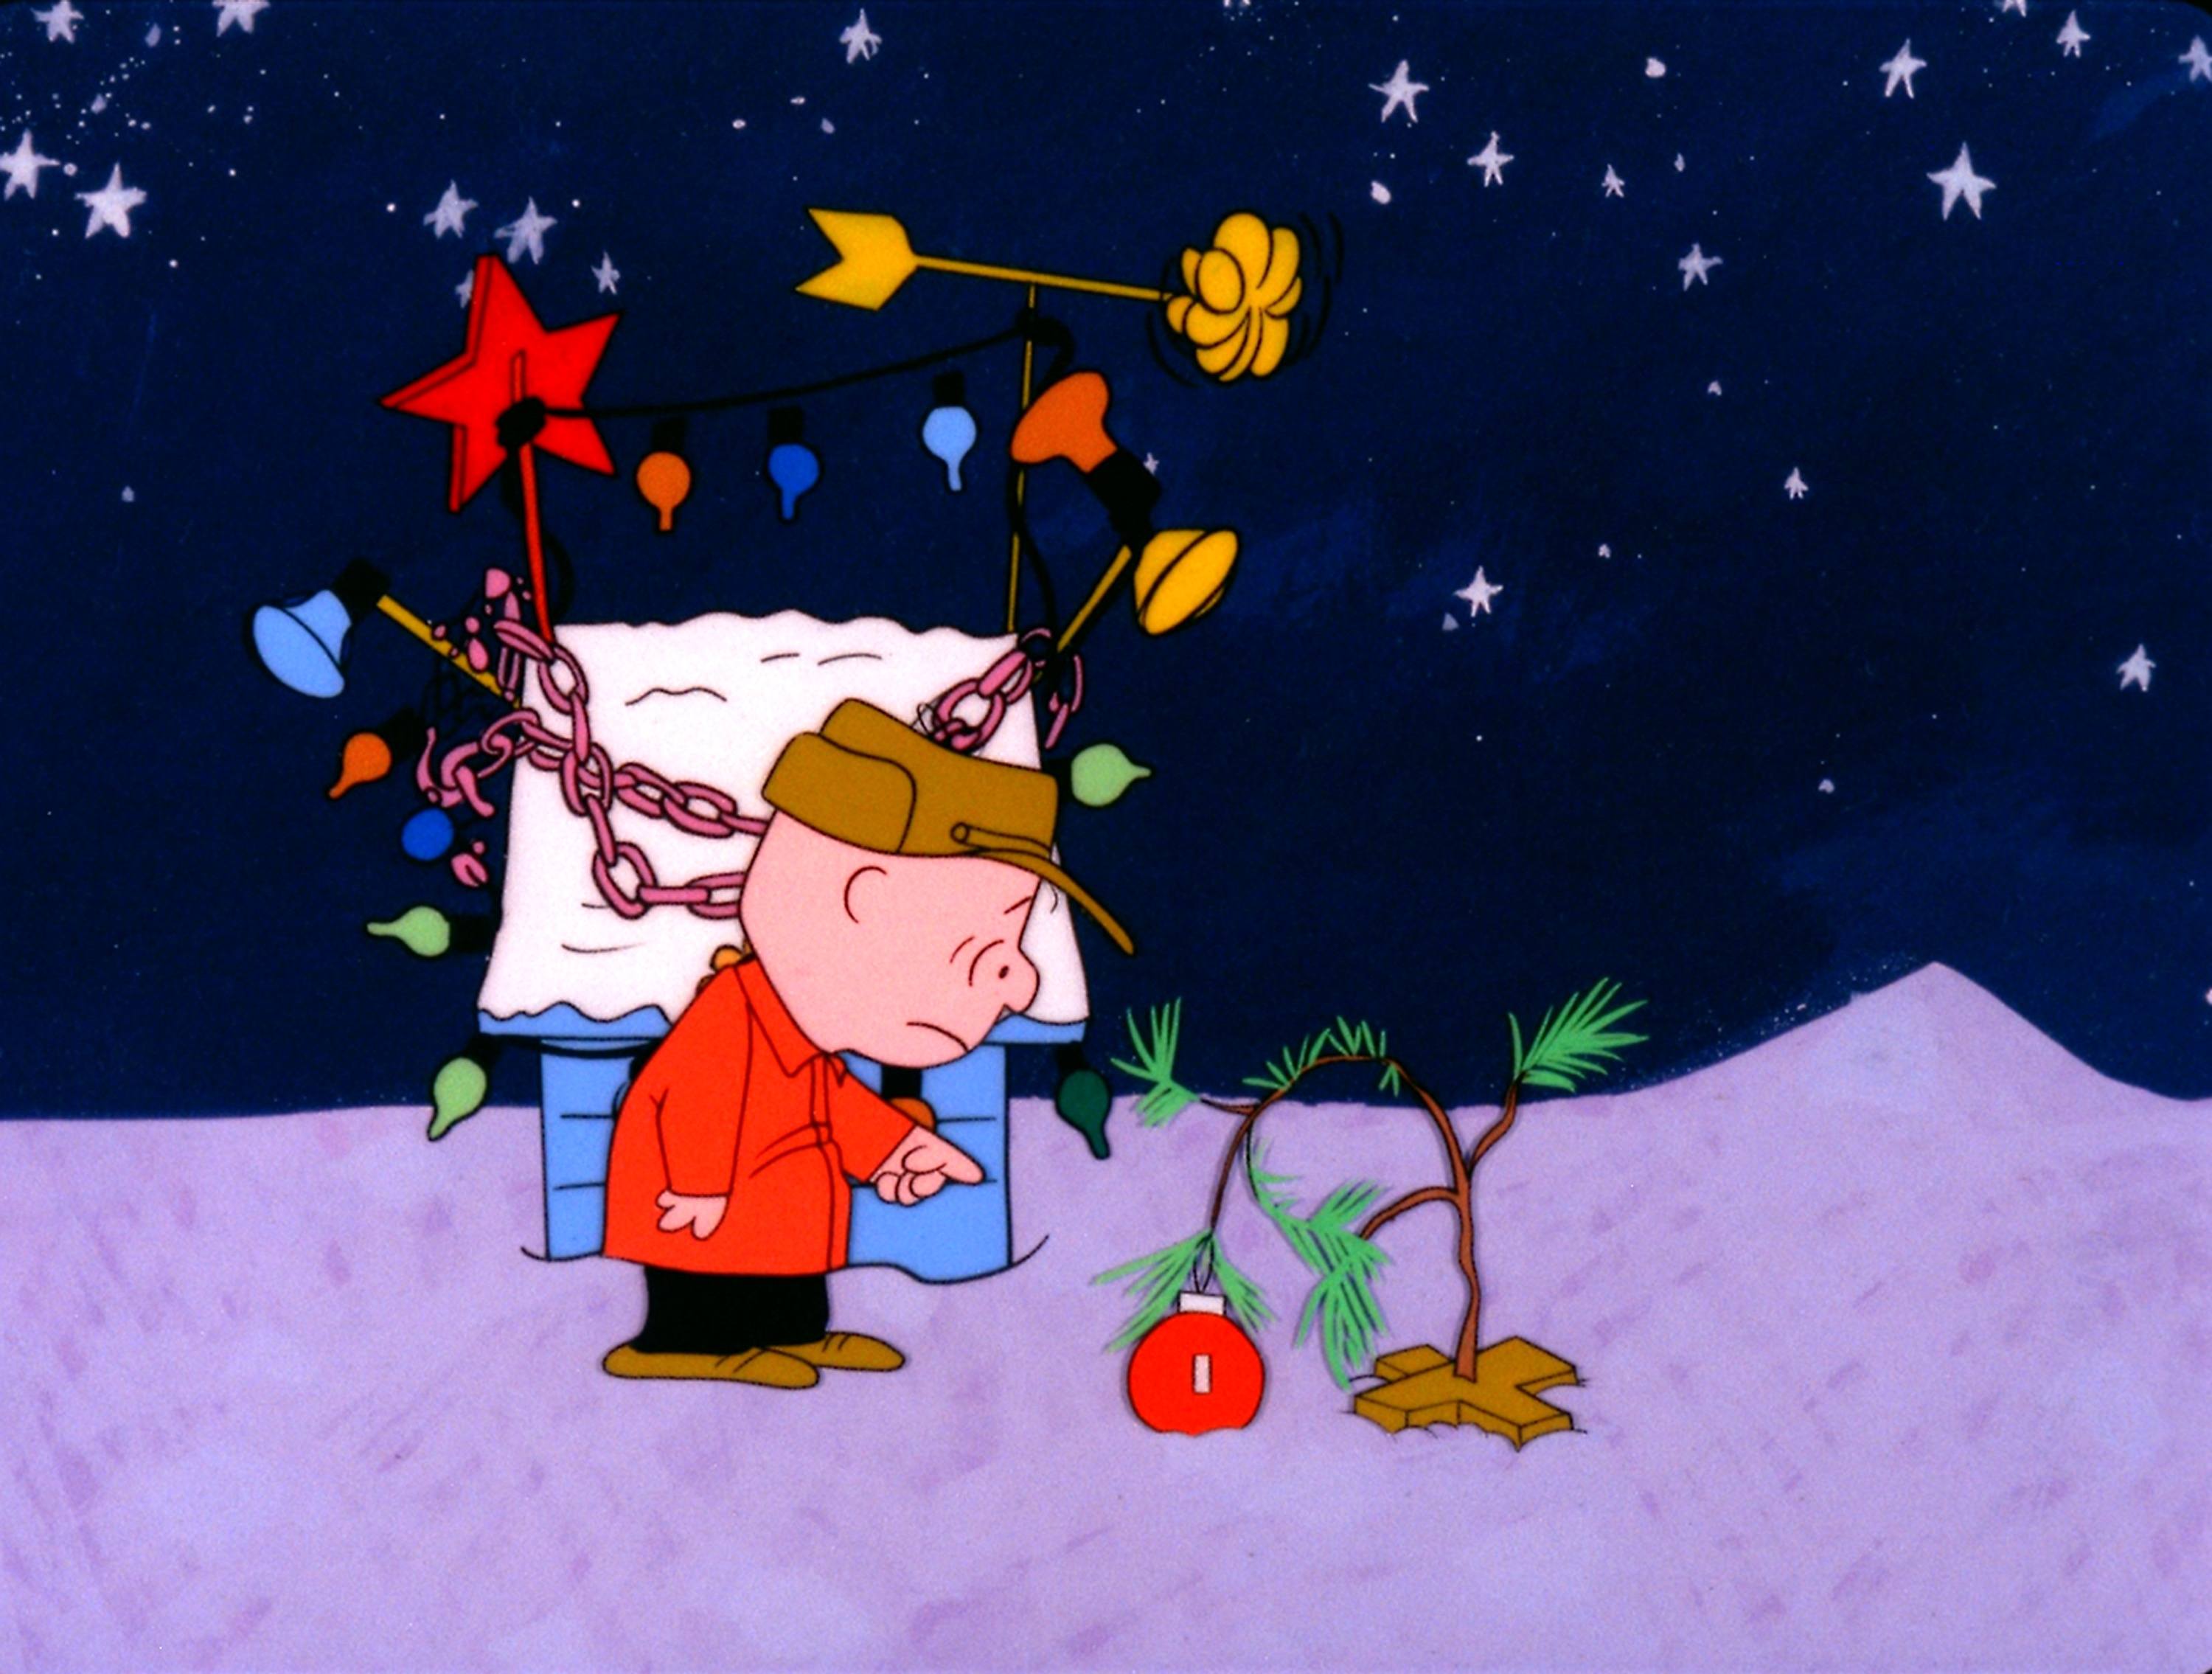 When Is 'A Charlie Brown Christmas' on TV in 2019?